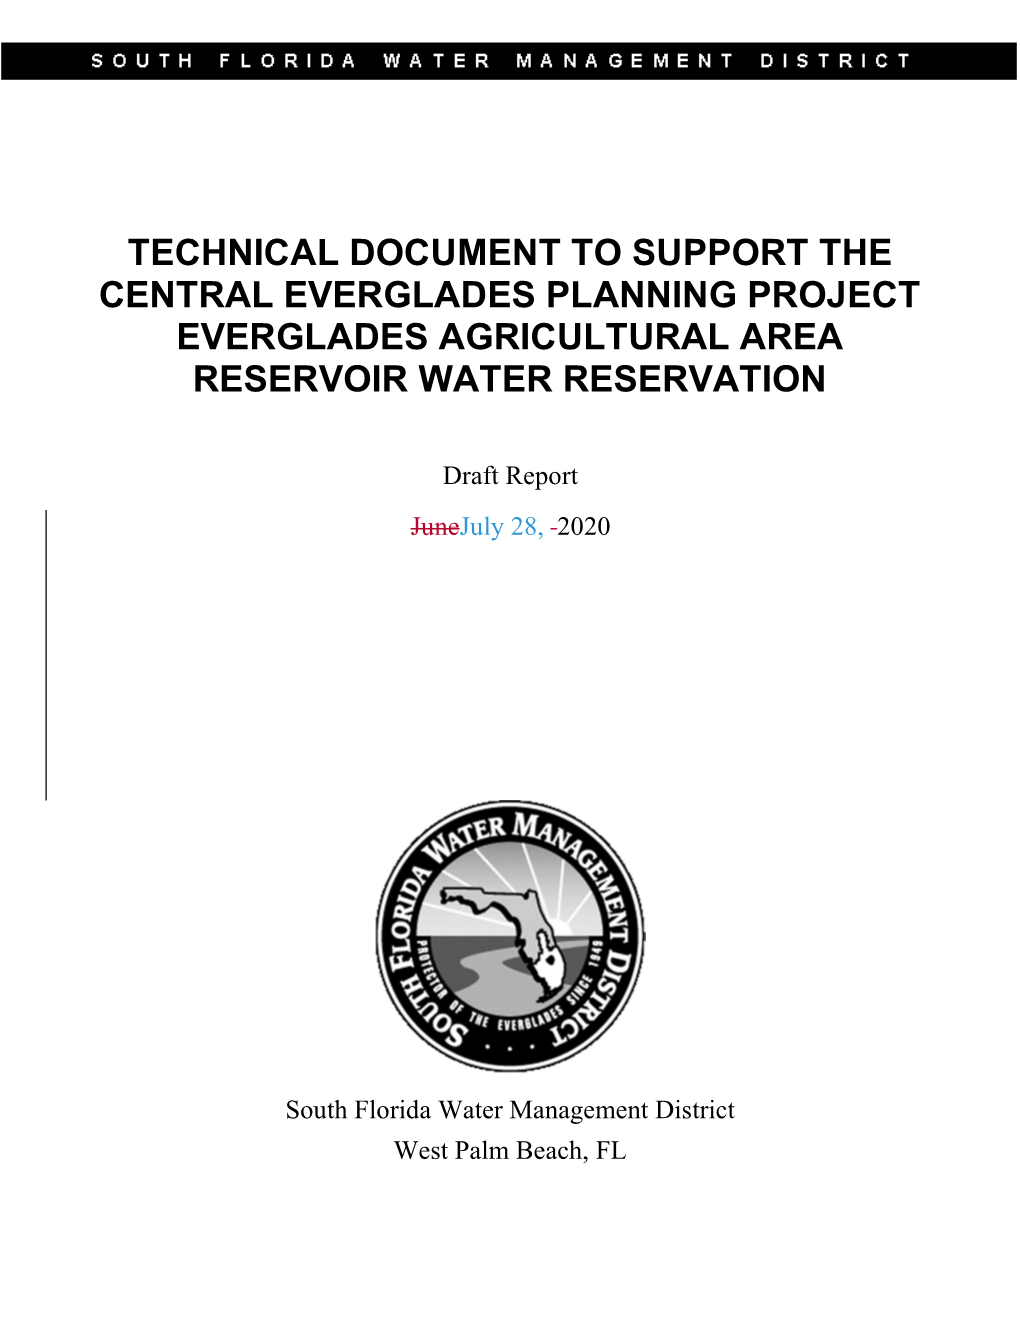 Technical Document to Support the Central Everglades Planning Project Everglades Agricultural Area Reservoir Water Reservation